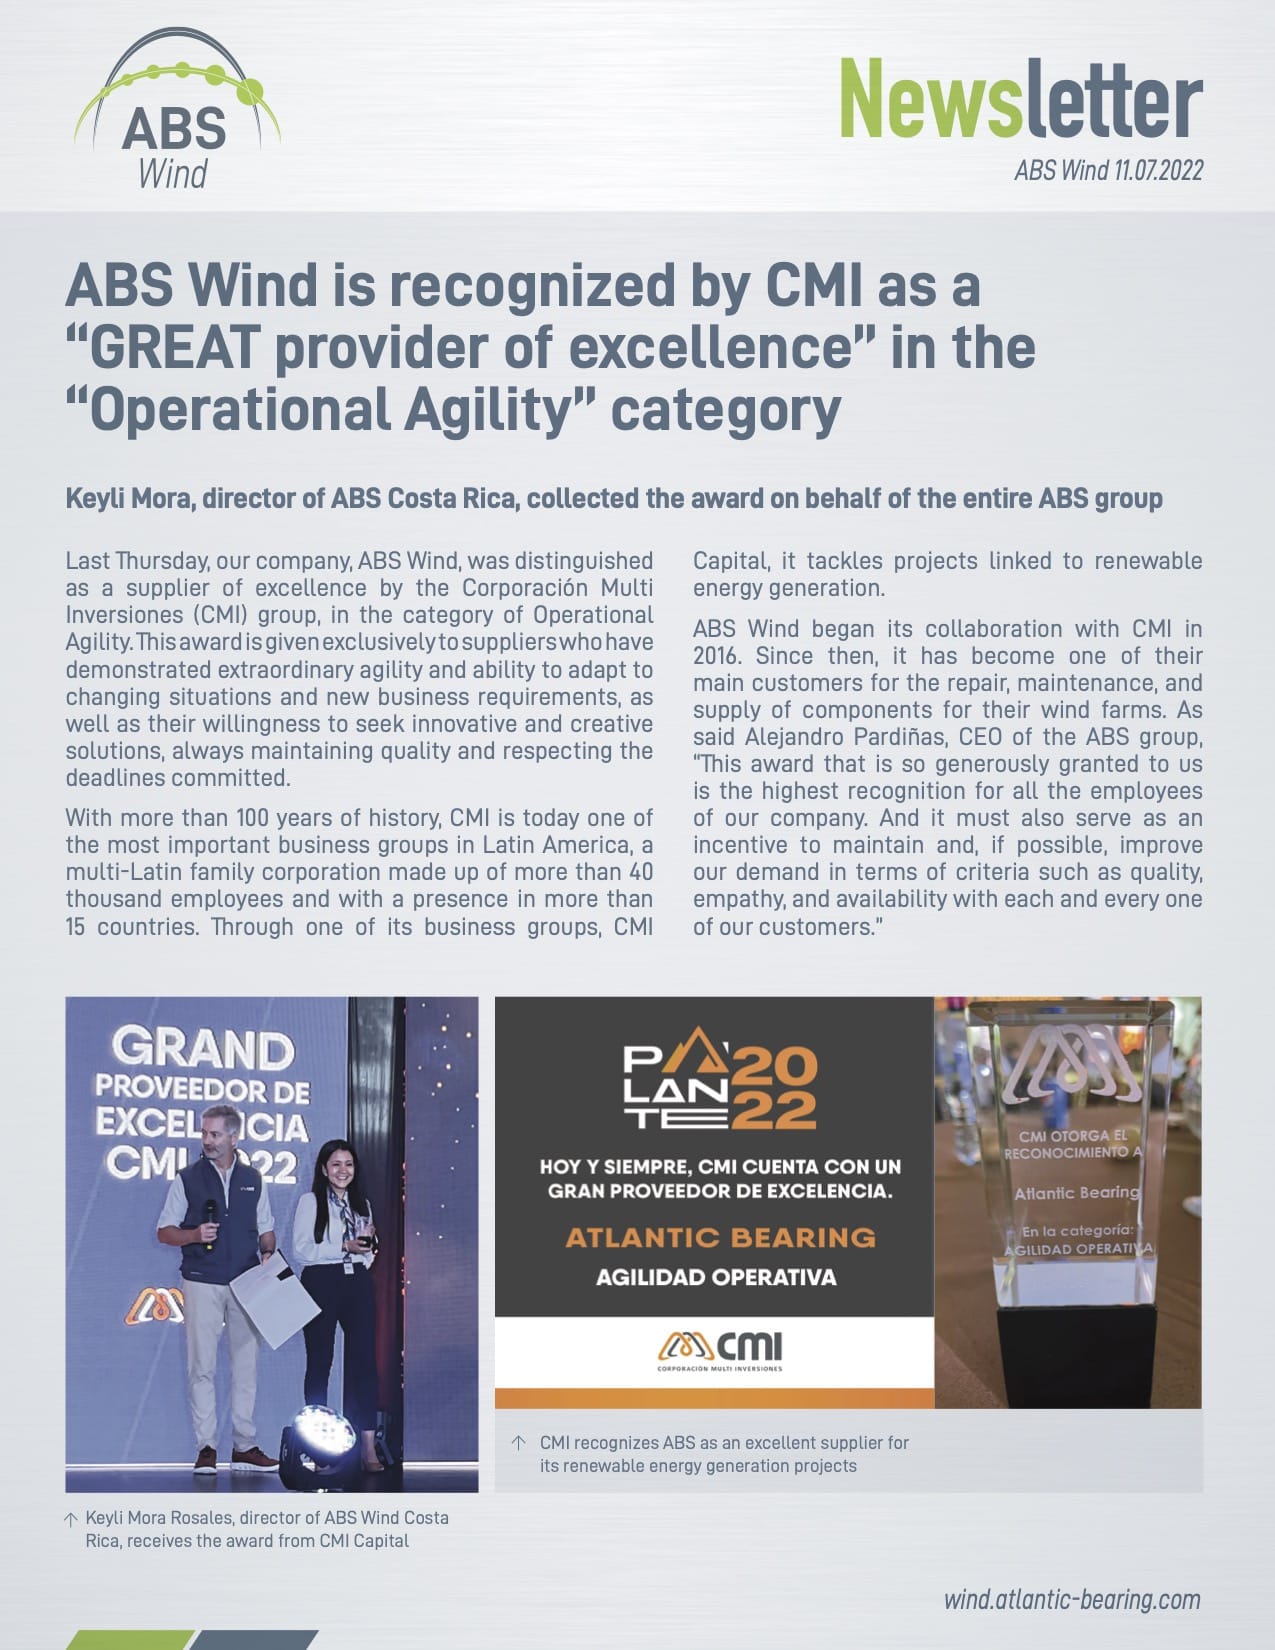 ABS Wind, was distinguished as a supplier of excellence by the Corporación Multi Inversiones (CMI) group, in the category of Operational Agility